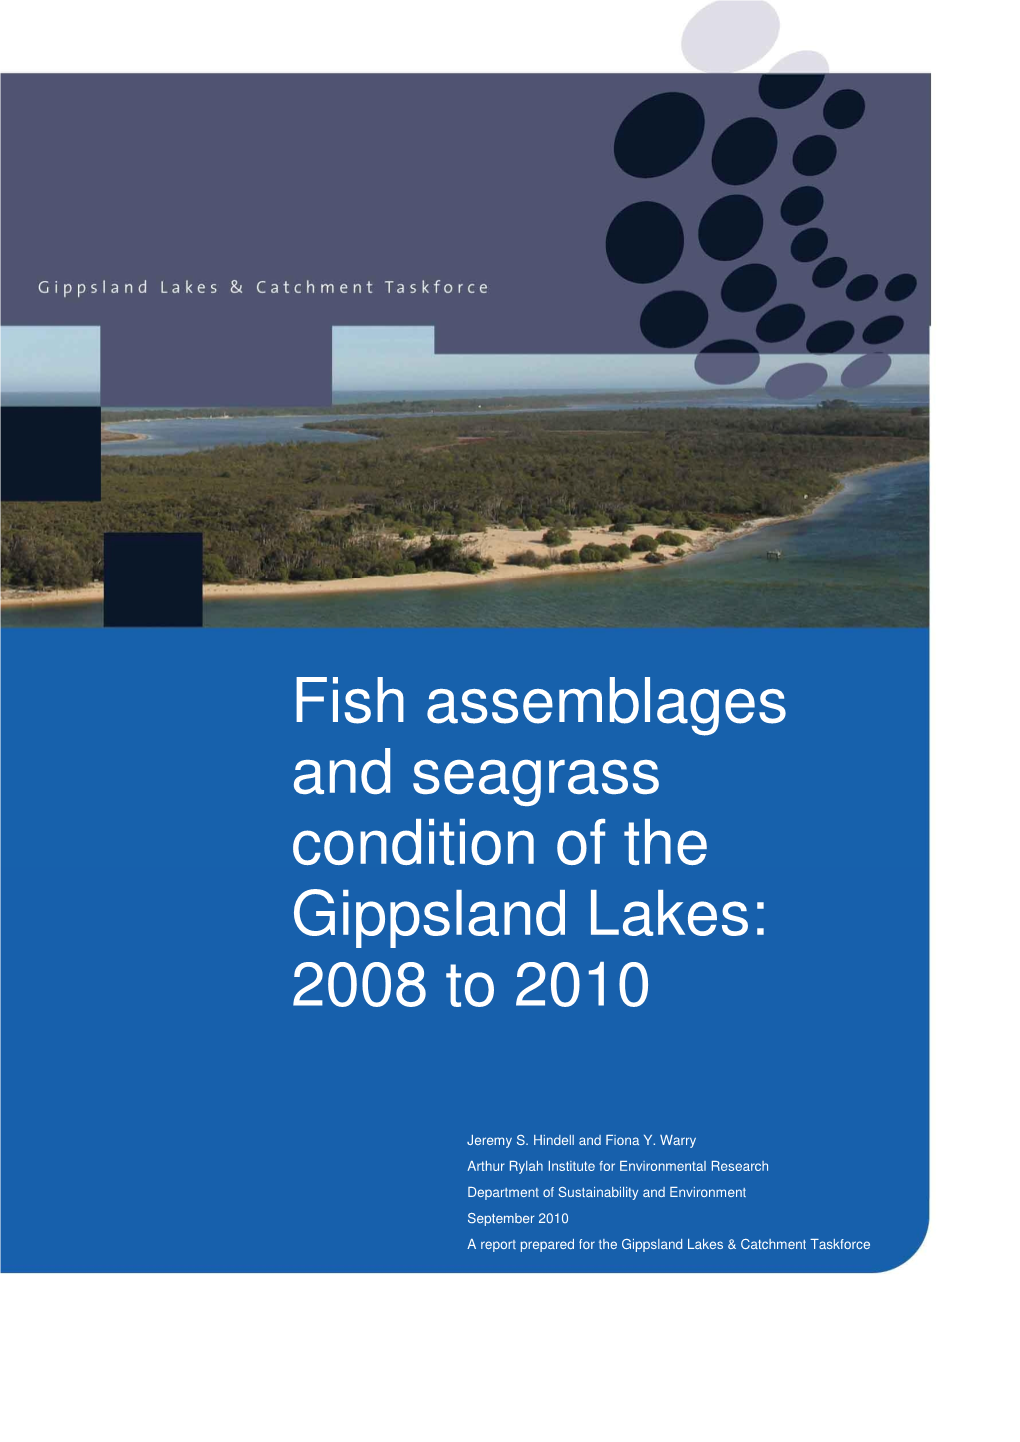 Fish Assemblages and Seagrass Condition of the Gippsland Lakes: 2008 to 2010